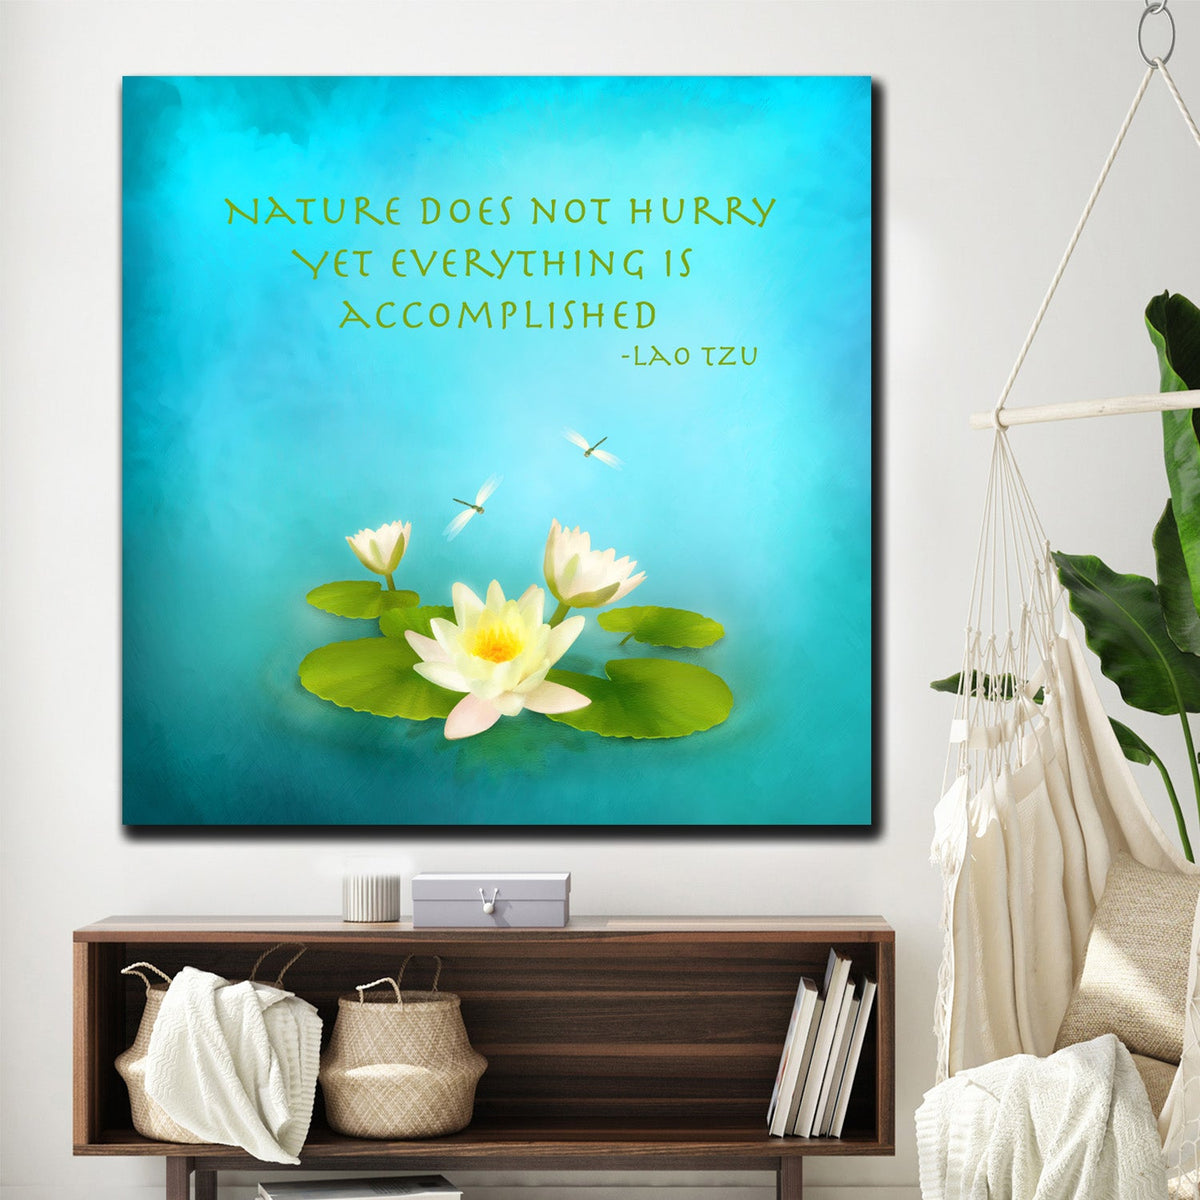 https://cdn.shopify.com/s/files/1/0387/9986/8044/products/NatureDoesnotHurryCanvasArtprintStretched-3.jpg